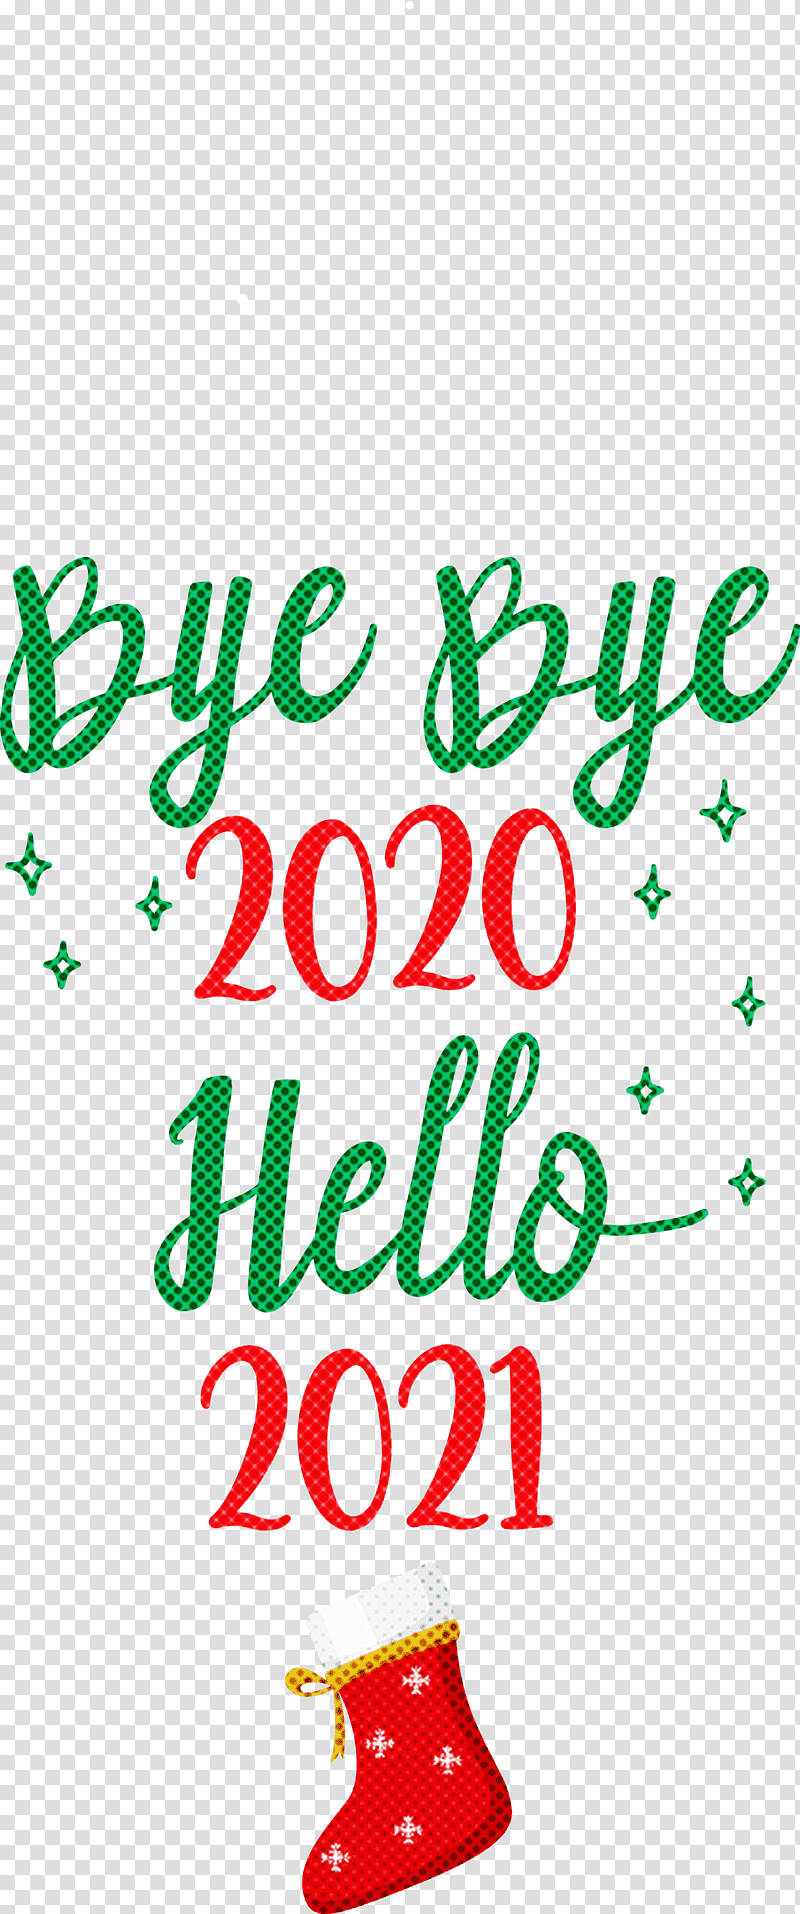 Hello 2021 Year Bye bye 2020 Year, Logo, Line, Meter, Happiness, Creativity, Geometry transparent background PNG clipart